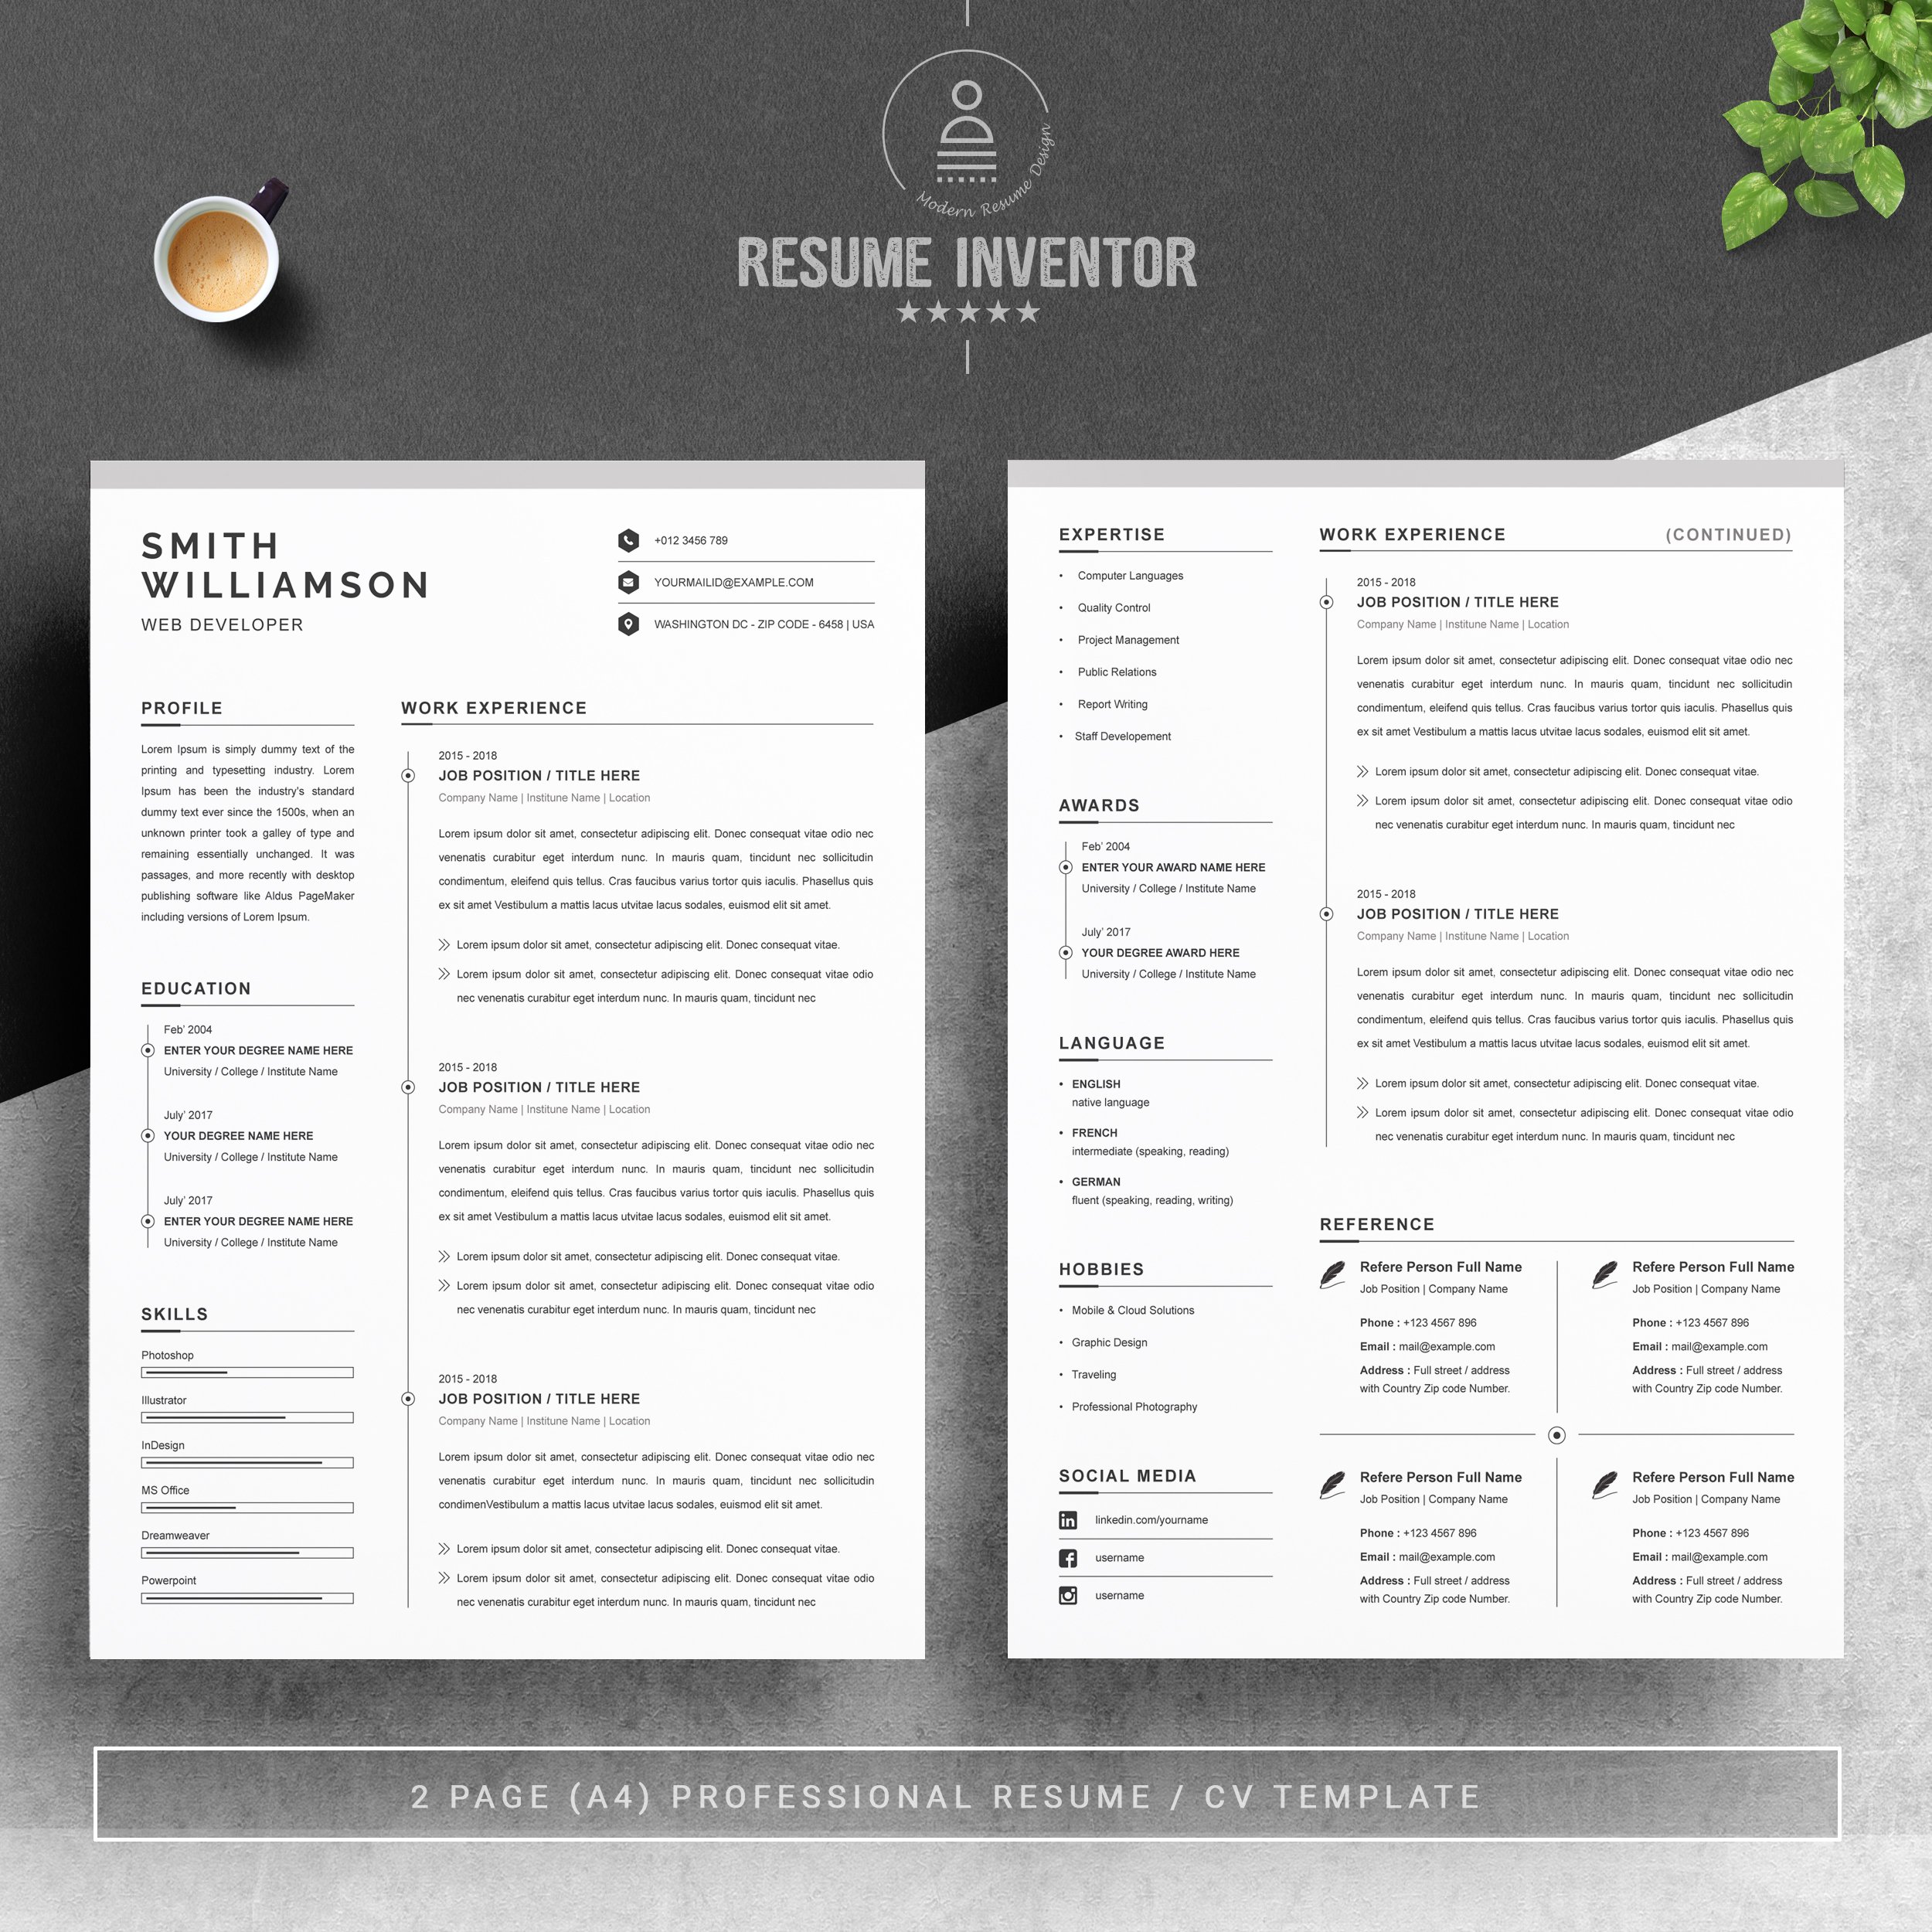 Clean Resume / CV Template MS Word preview image.